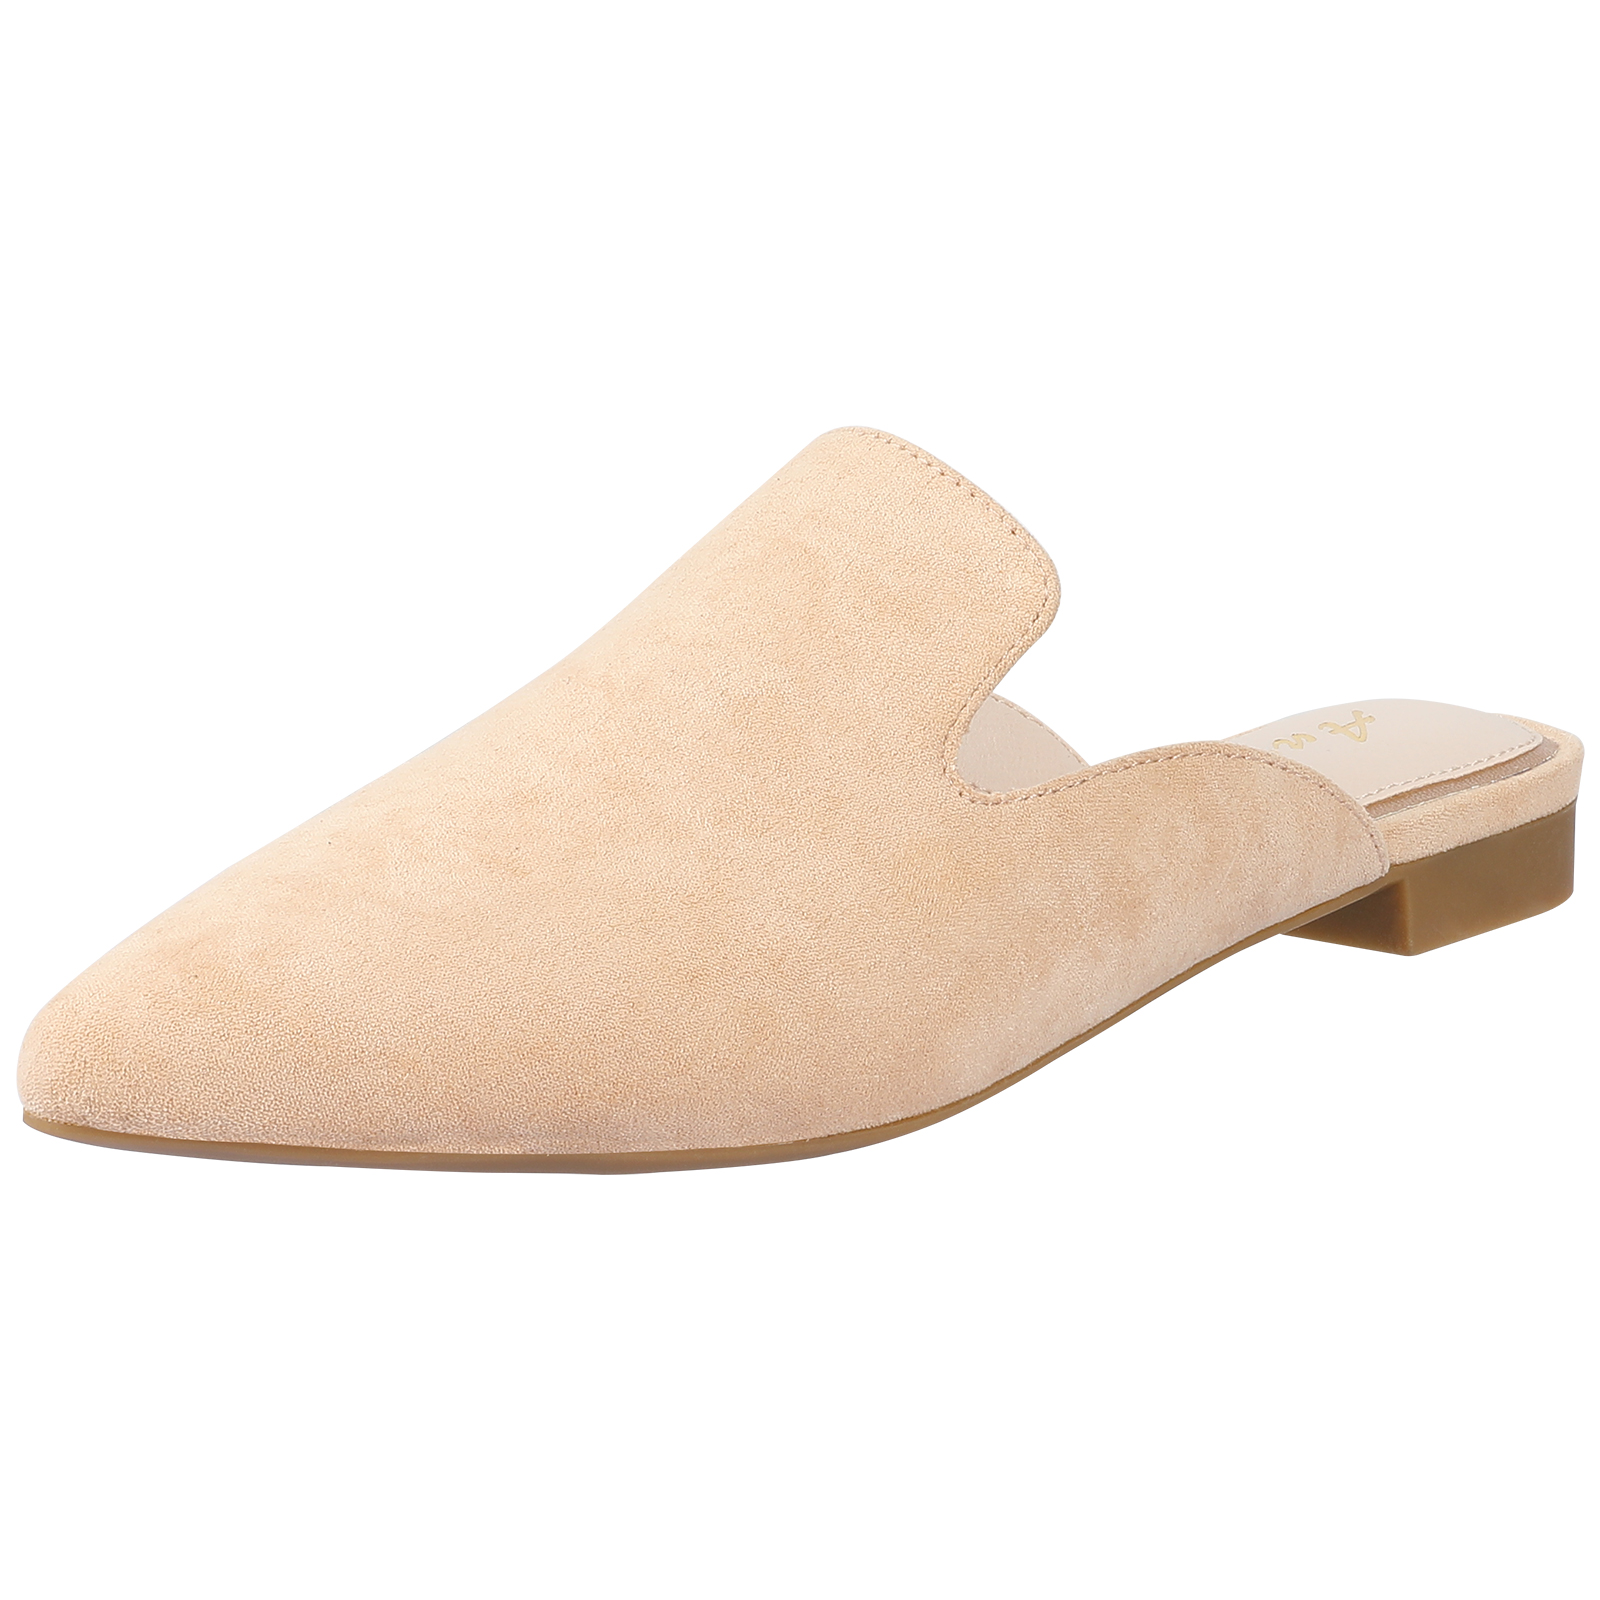 Mules for Women Flats Comfortable-Nude